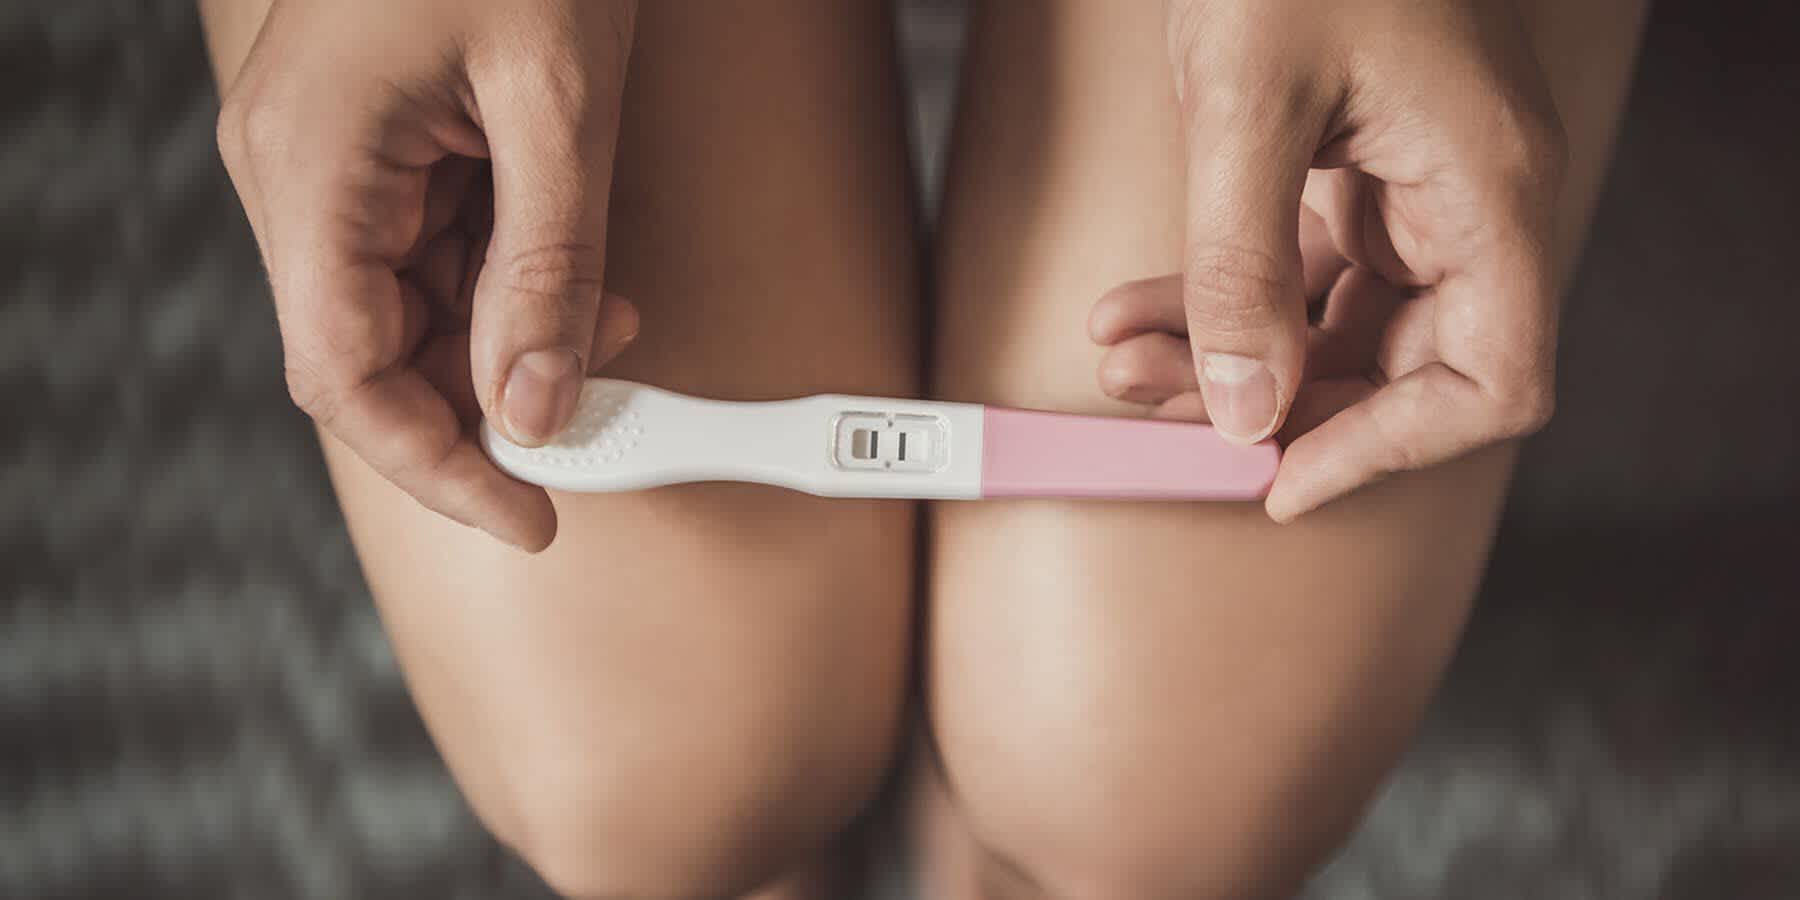 Find your most fertile period with an ovulation test